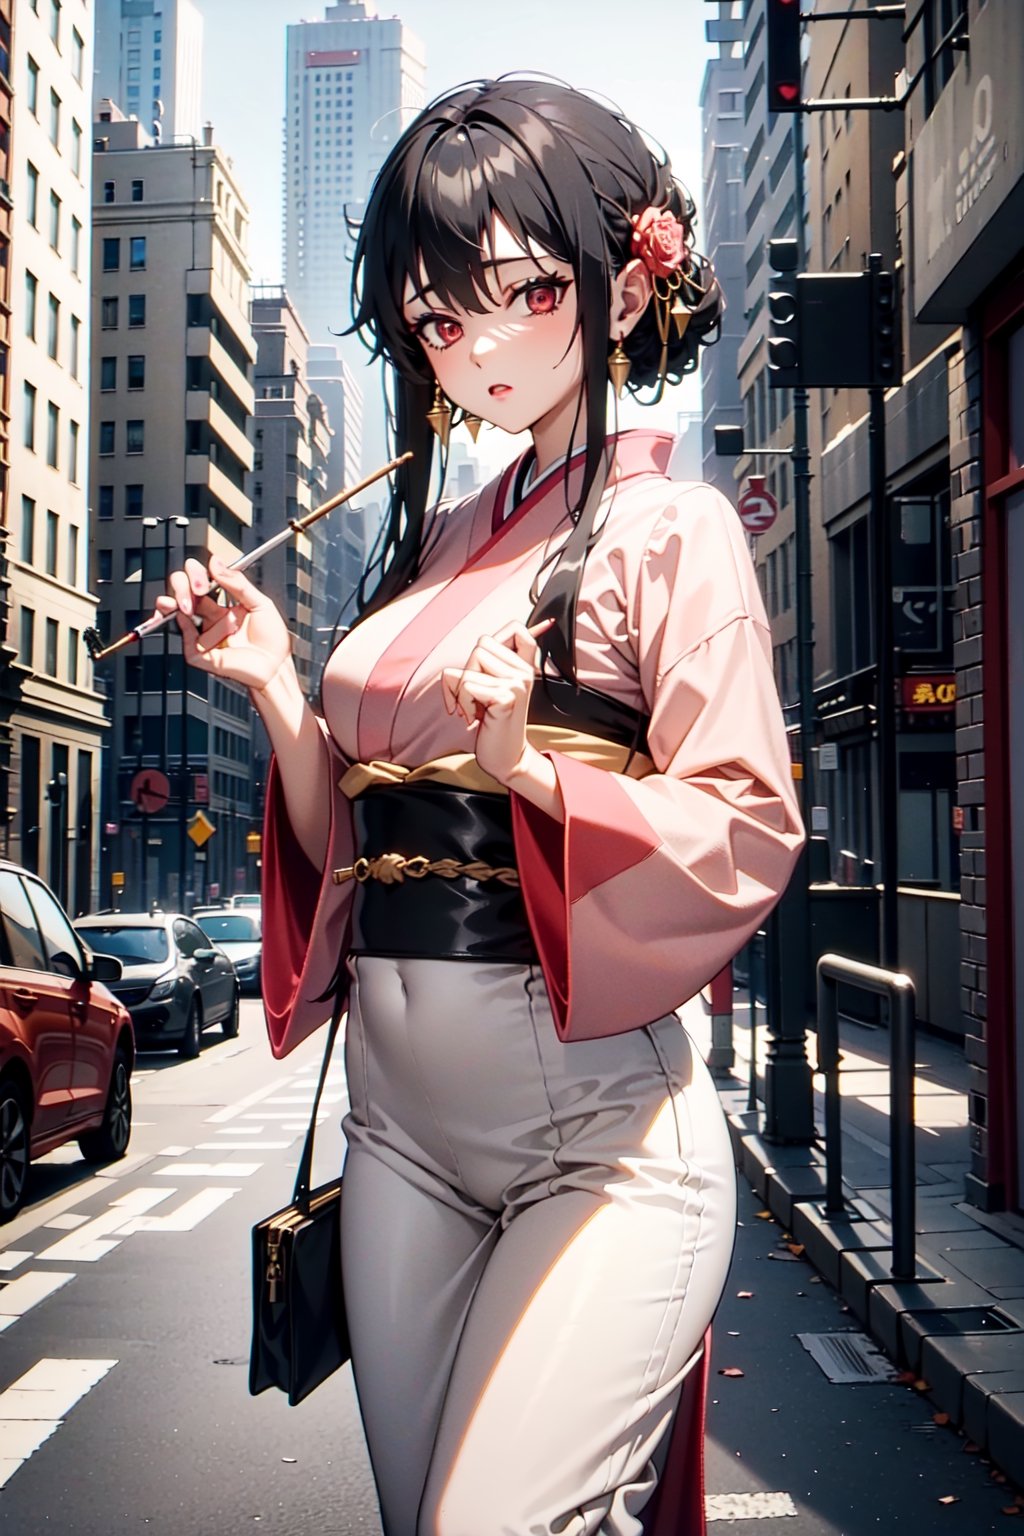 The image shows a woman in a pink kimono standing on a street in a city. She has long, black hair and is wearing a white blouse and pink kimono. She is holding a purse and has a cigarette in her hand. The background is a city street with buildings and cars in the distance. The overall mood of the image is sexy and alluring,china dress with heart cutout, red eyes,bbyorf